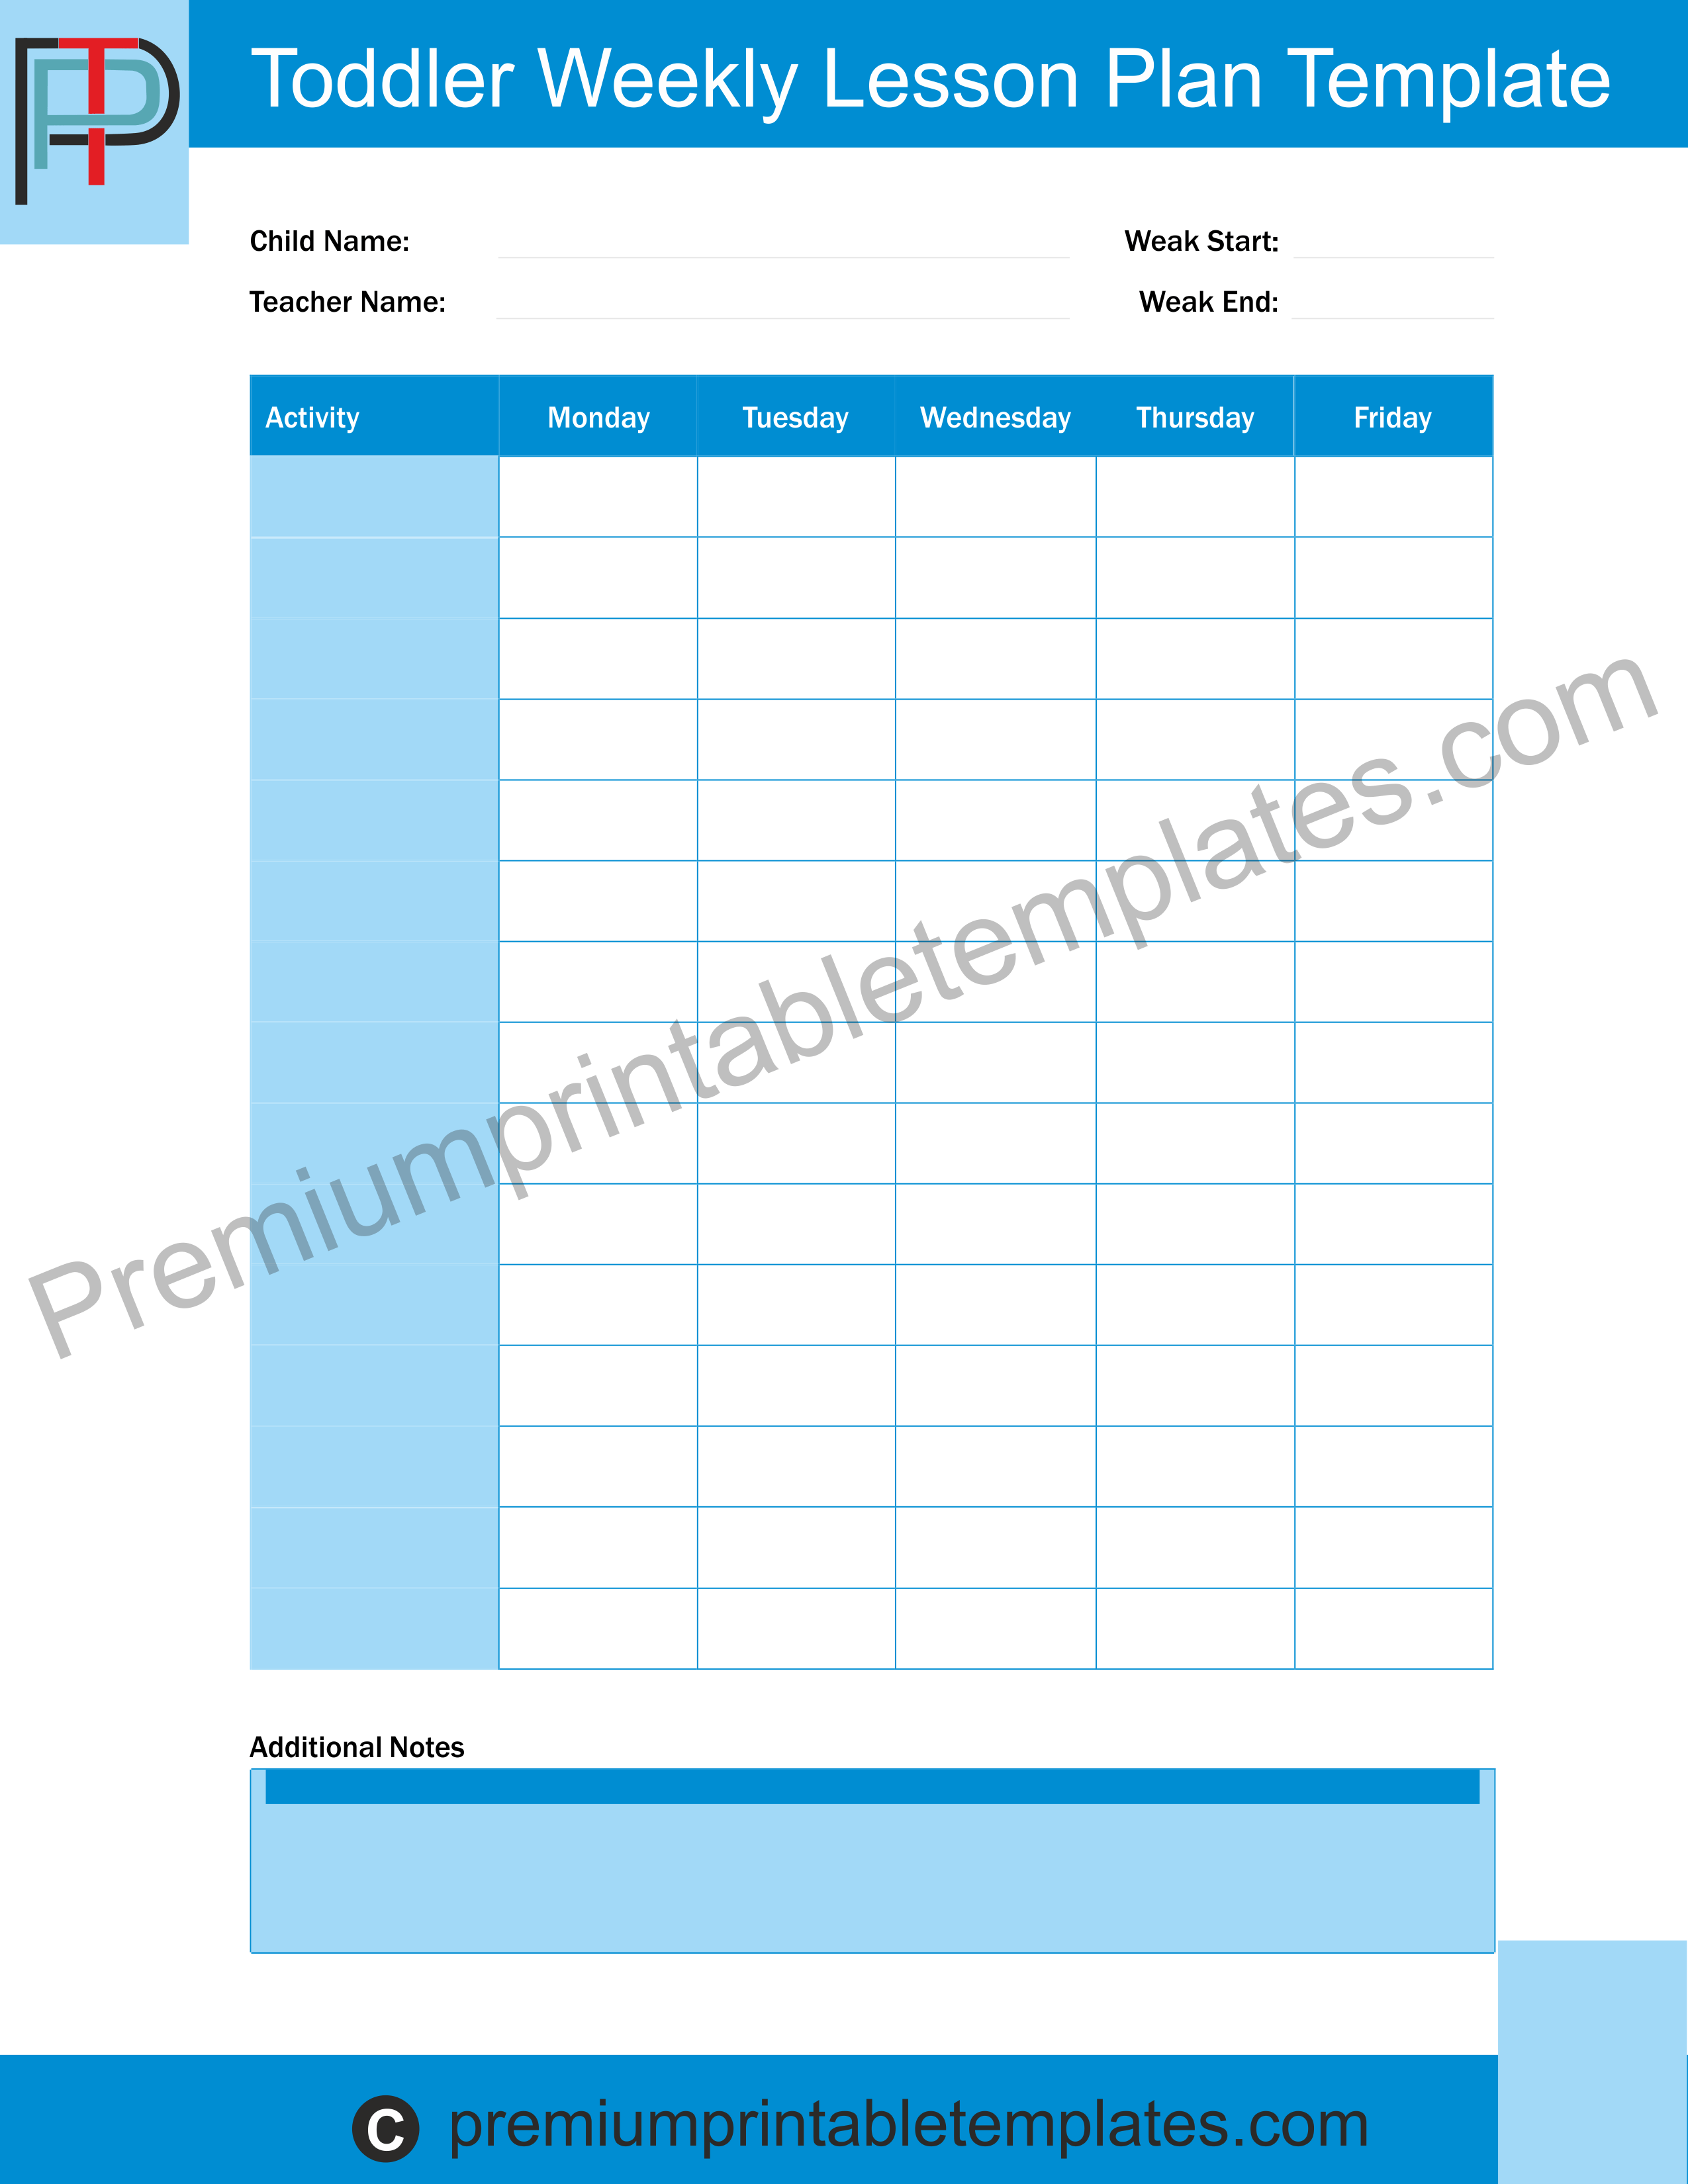 Lesson Plans Template For Toddlers from premiumprintabletemplates.com